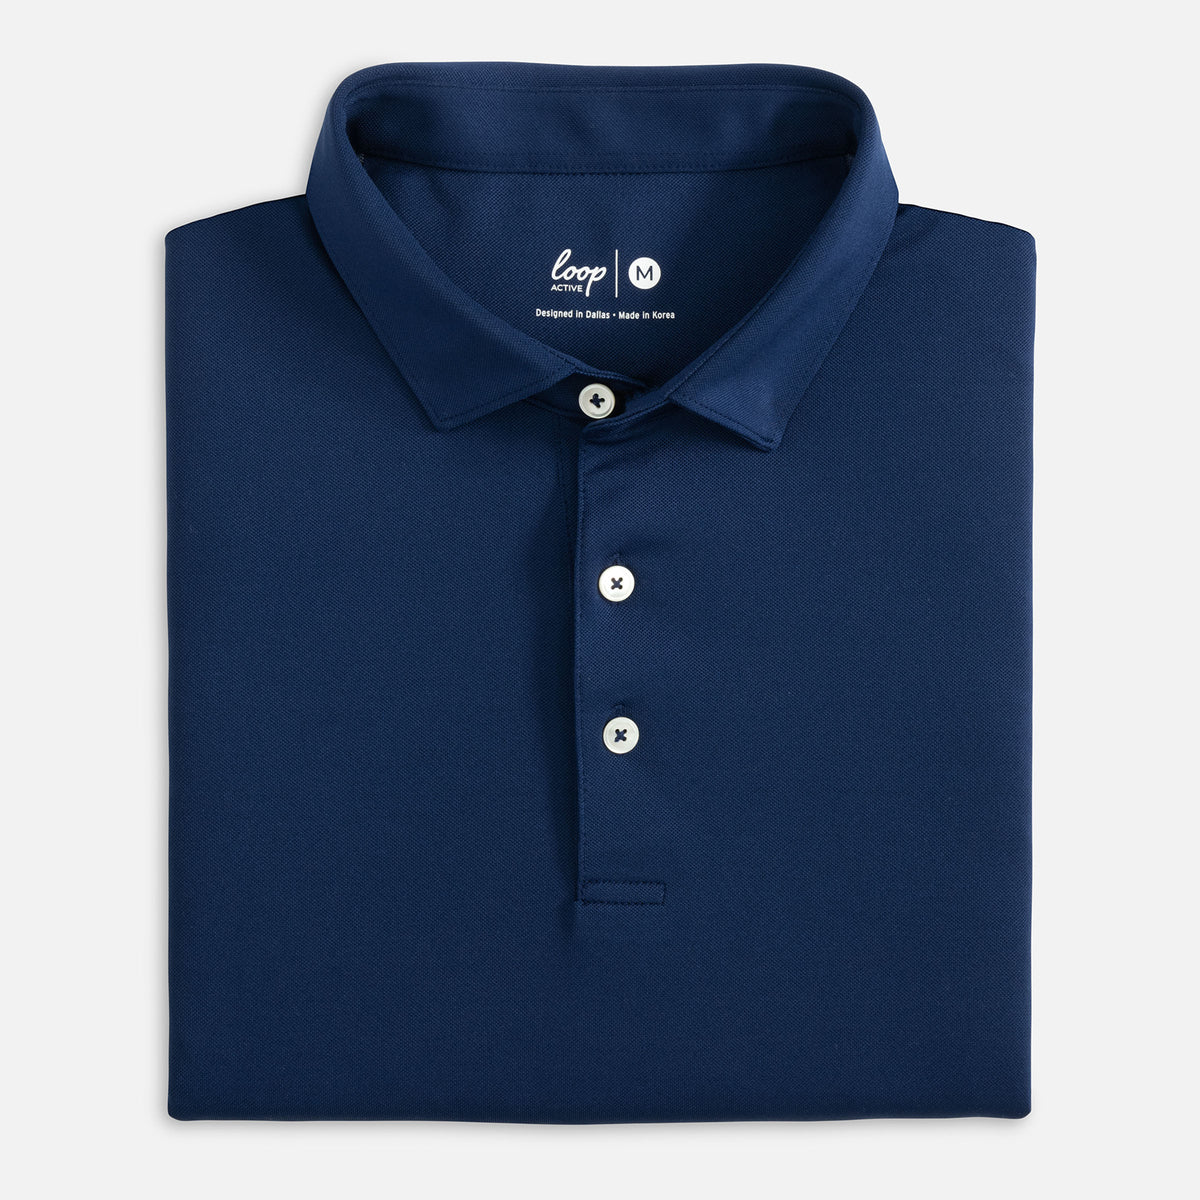 Troon Polo